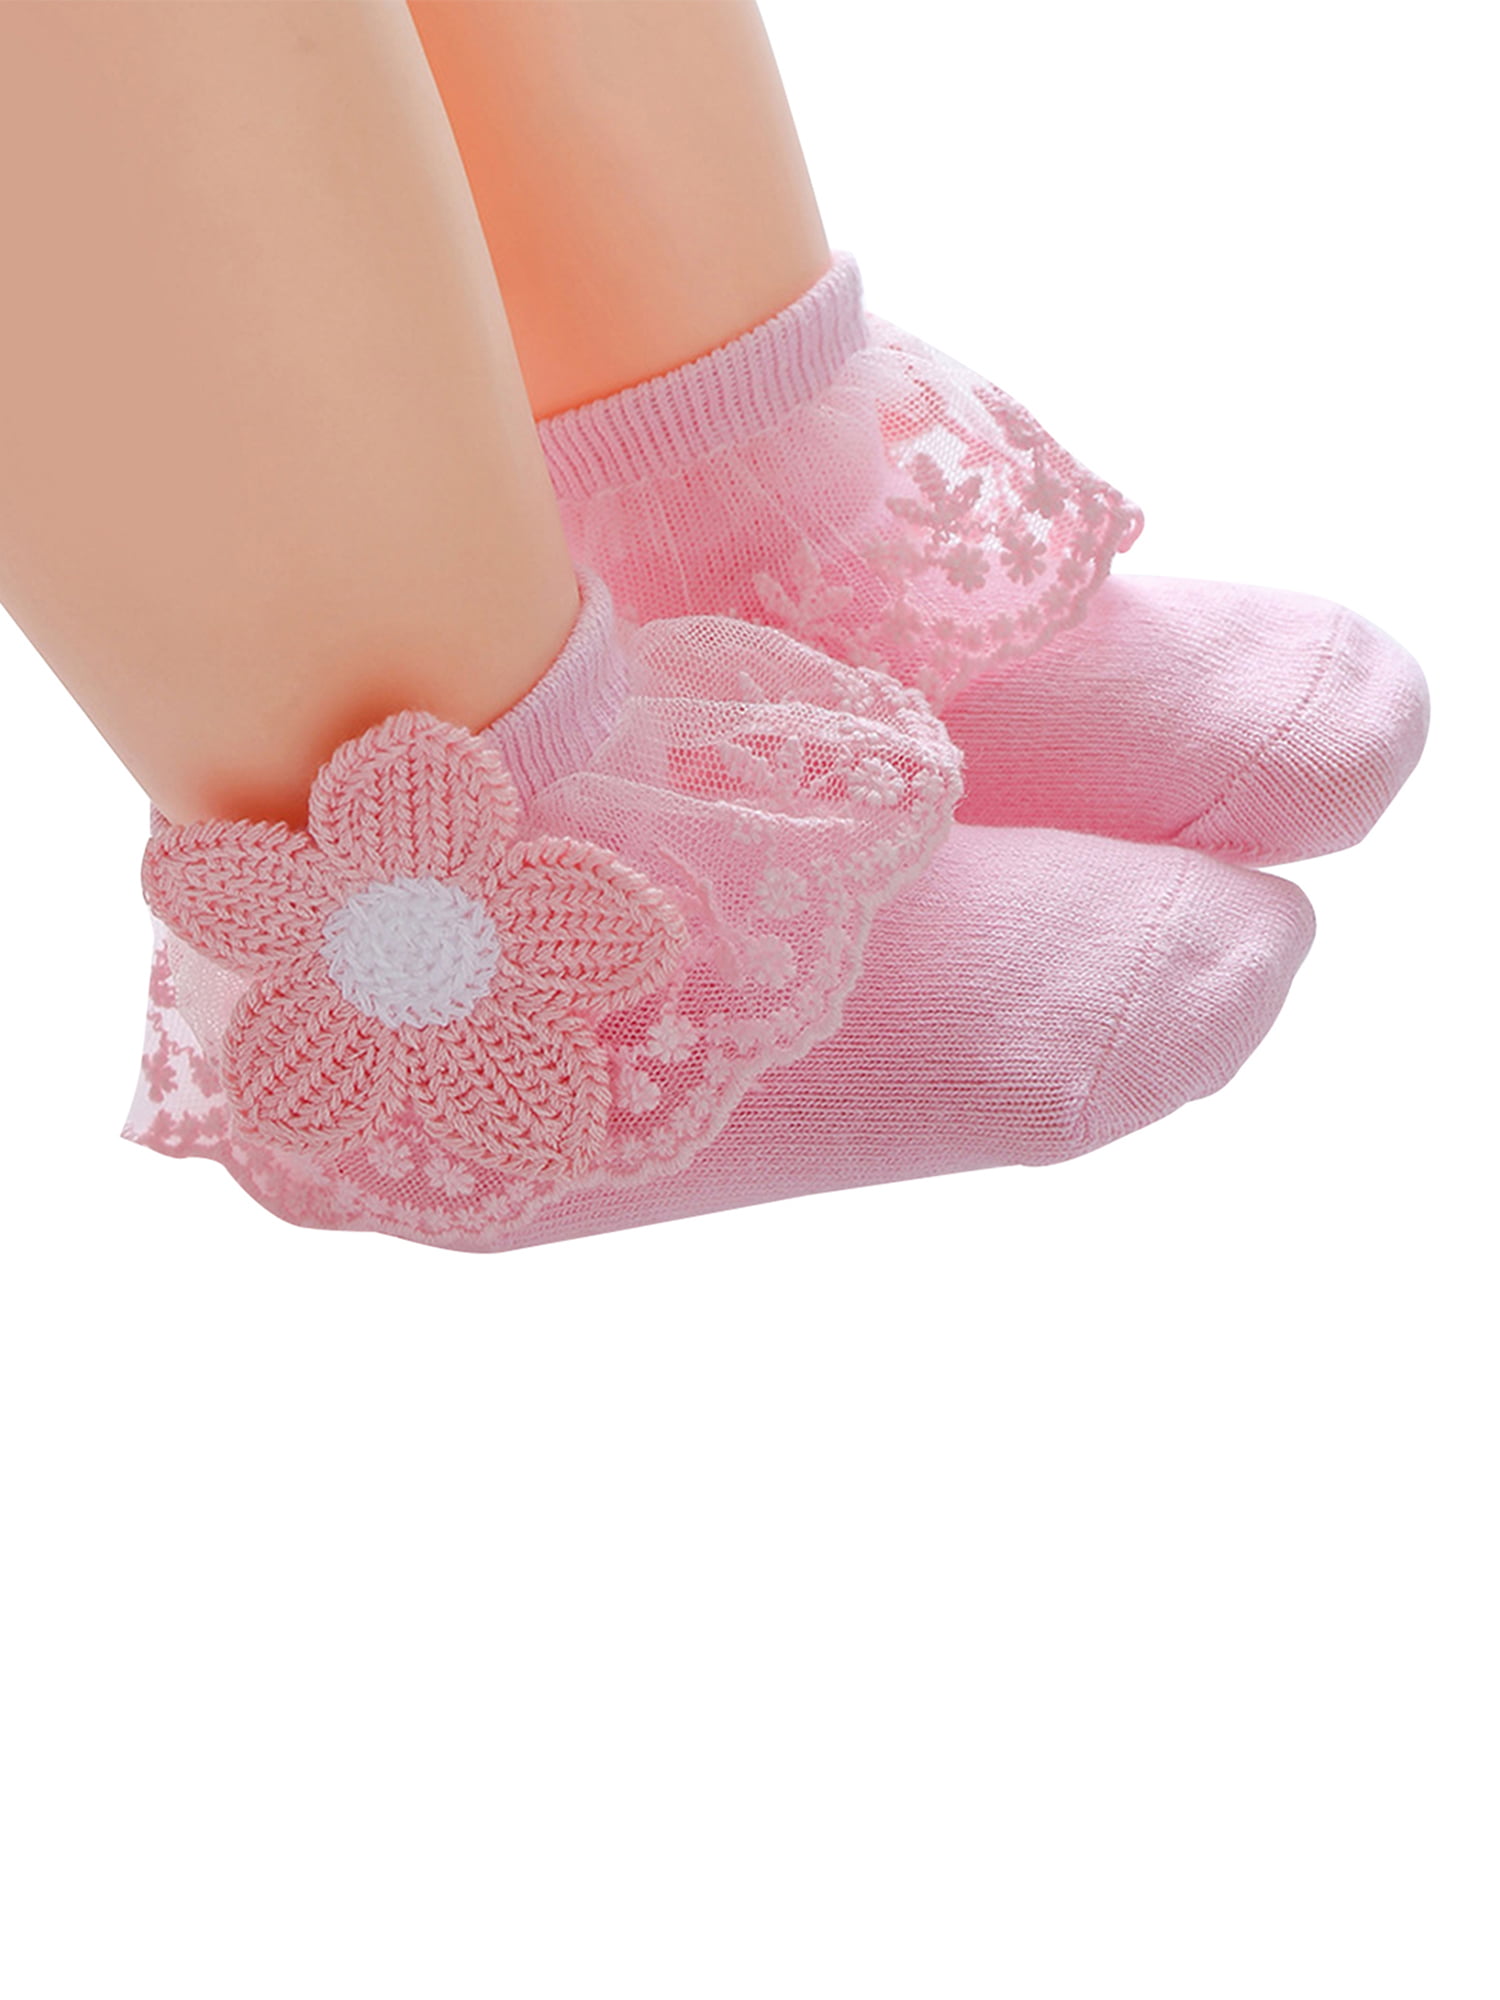 BABY GIRLS FRILLY LACE ANKLE SOCKS WHITE EVERYDAY WEDDING CHRISTENING OCCASION 